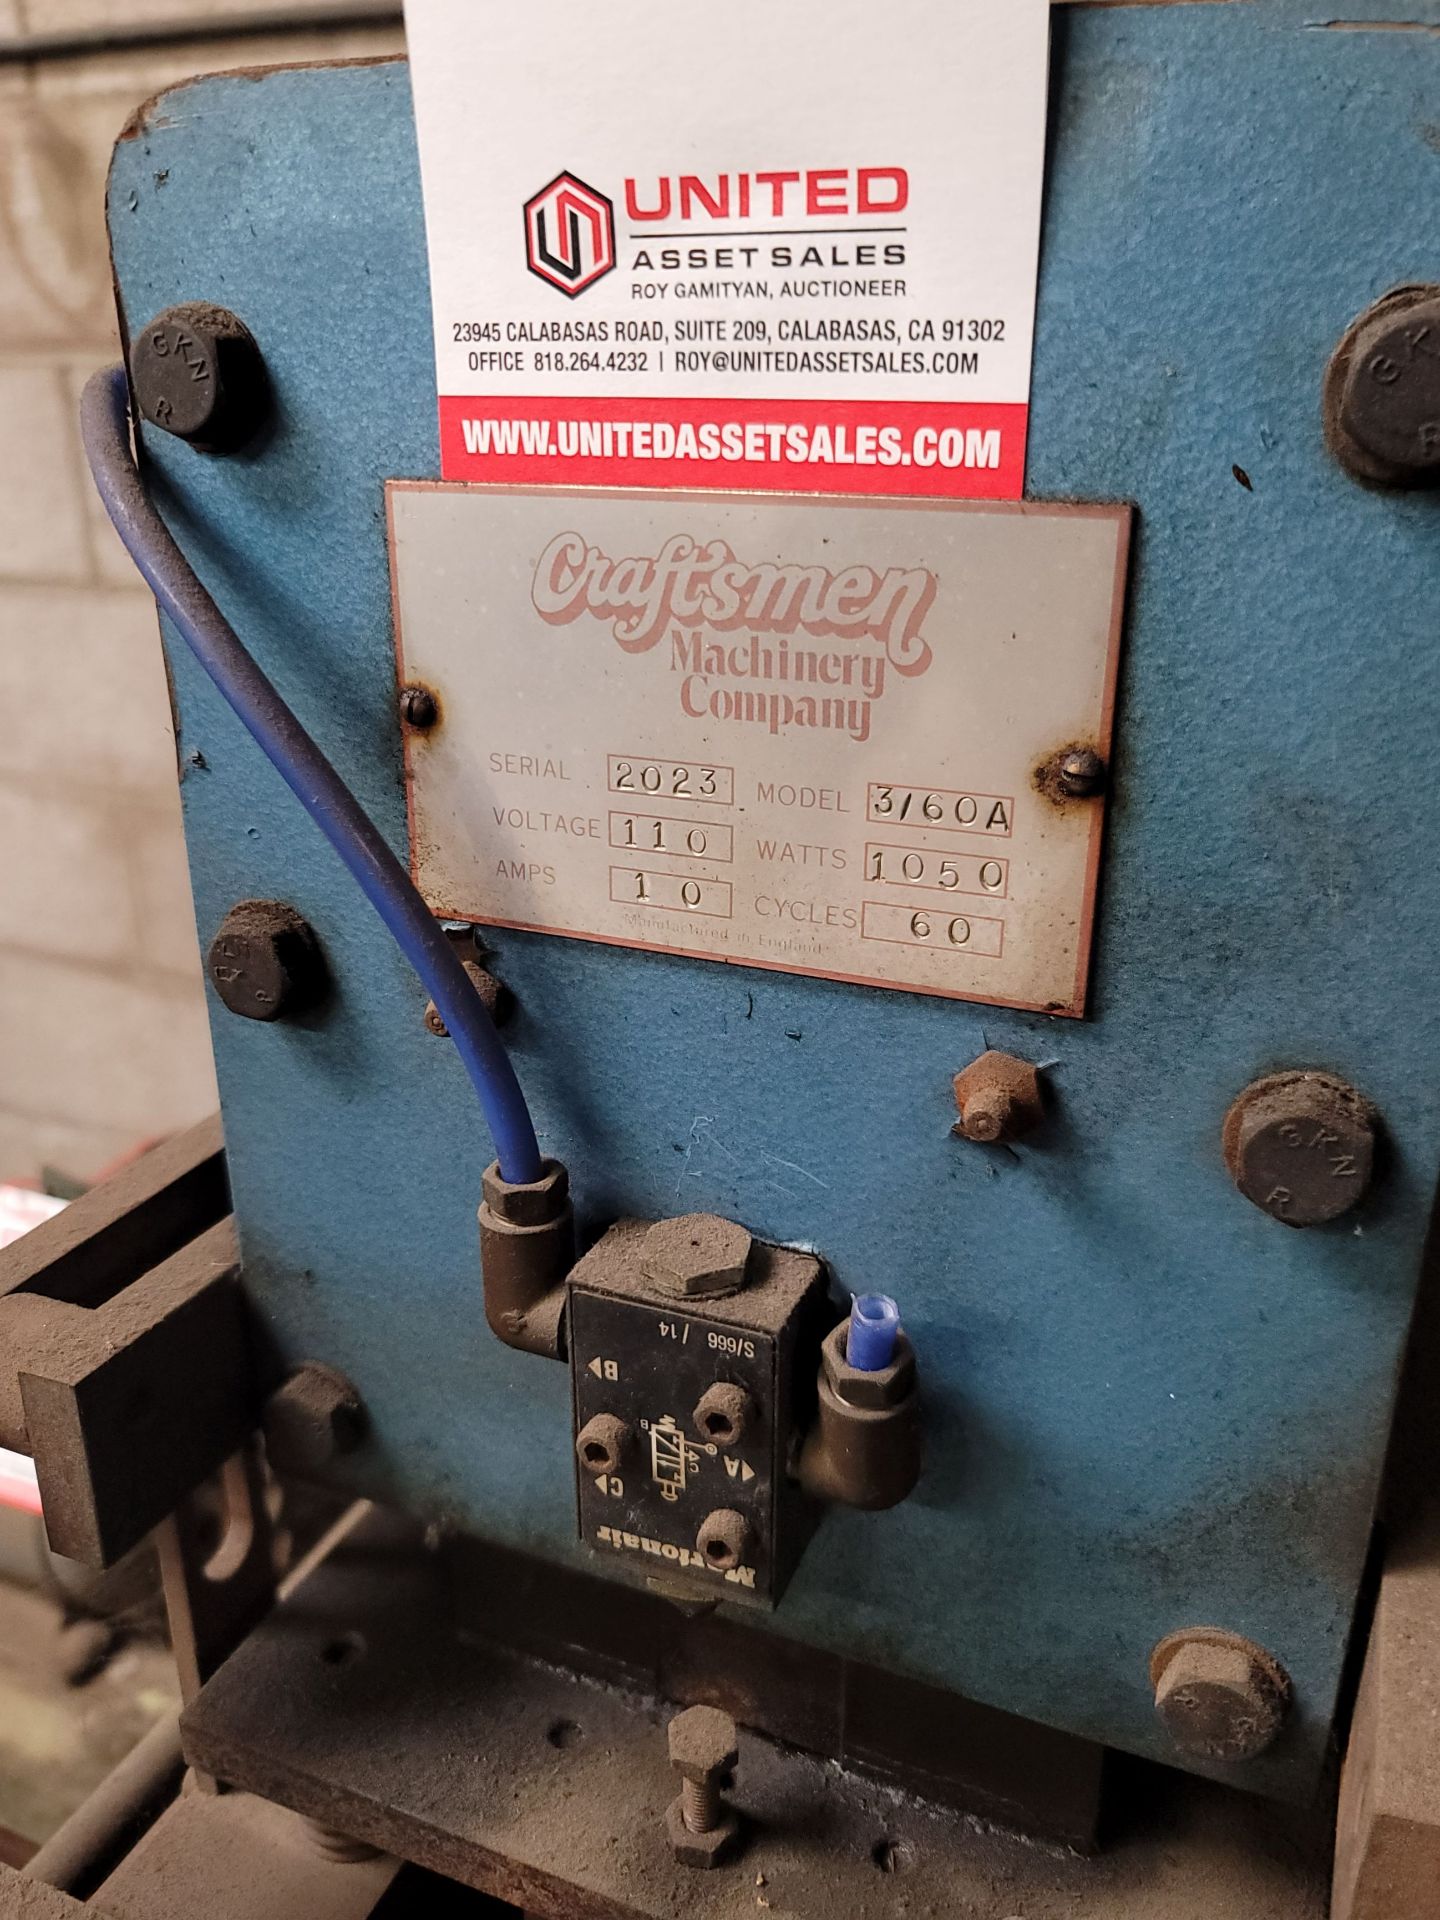 CRAFTSMEN MACHINERY CO. HOT STAMP MACHINE, MODEL 3/60A, S/N 2023 - Image 2 of 2